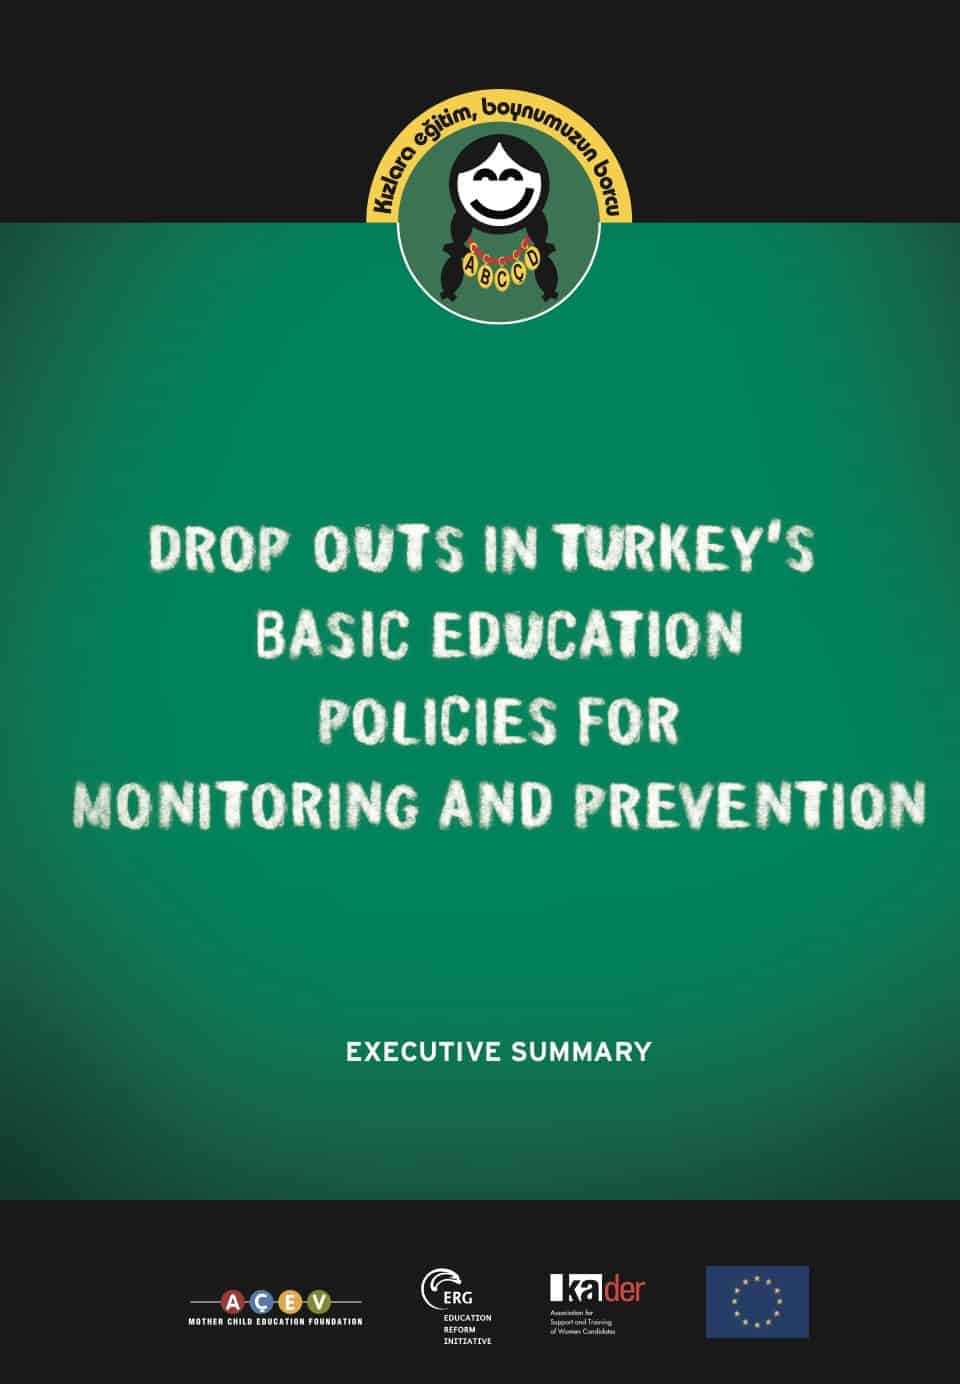 Drop Outs In Turkey’s Basic Education Policies For Monitoring And Prevention